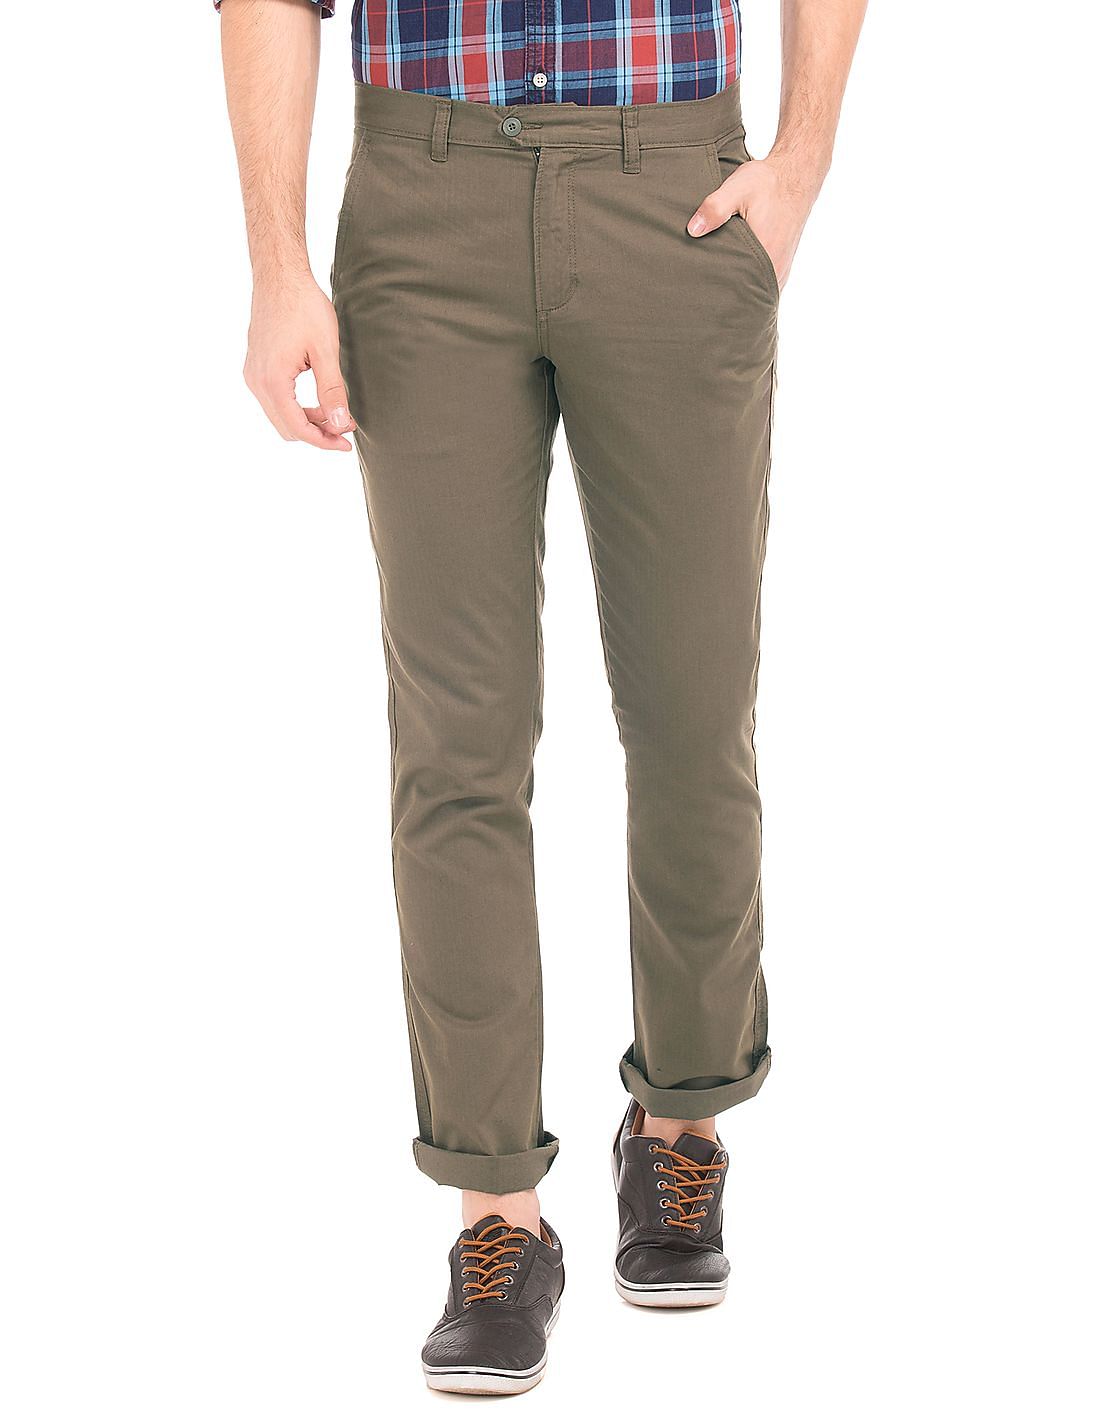 Buy Ruggers Low Rise Slim Fit Trousers - NNNOW.com